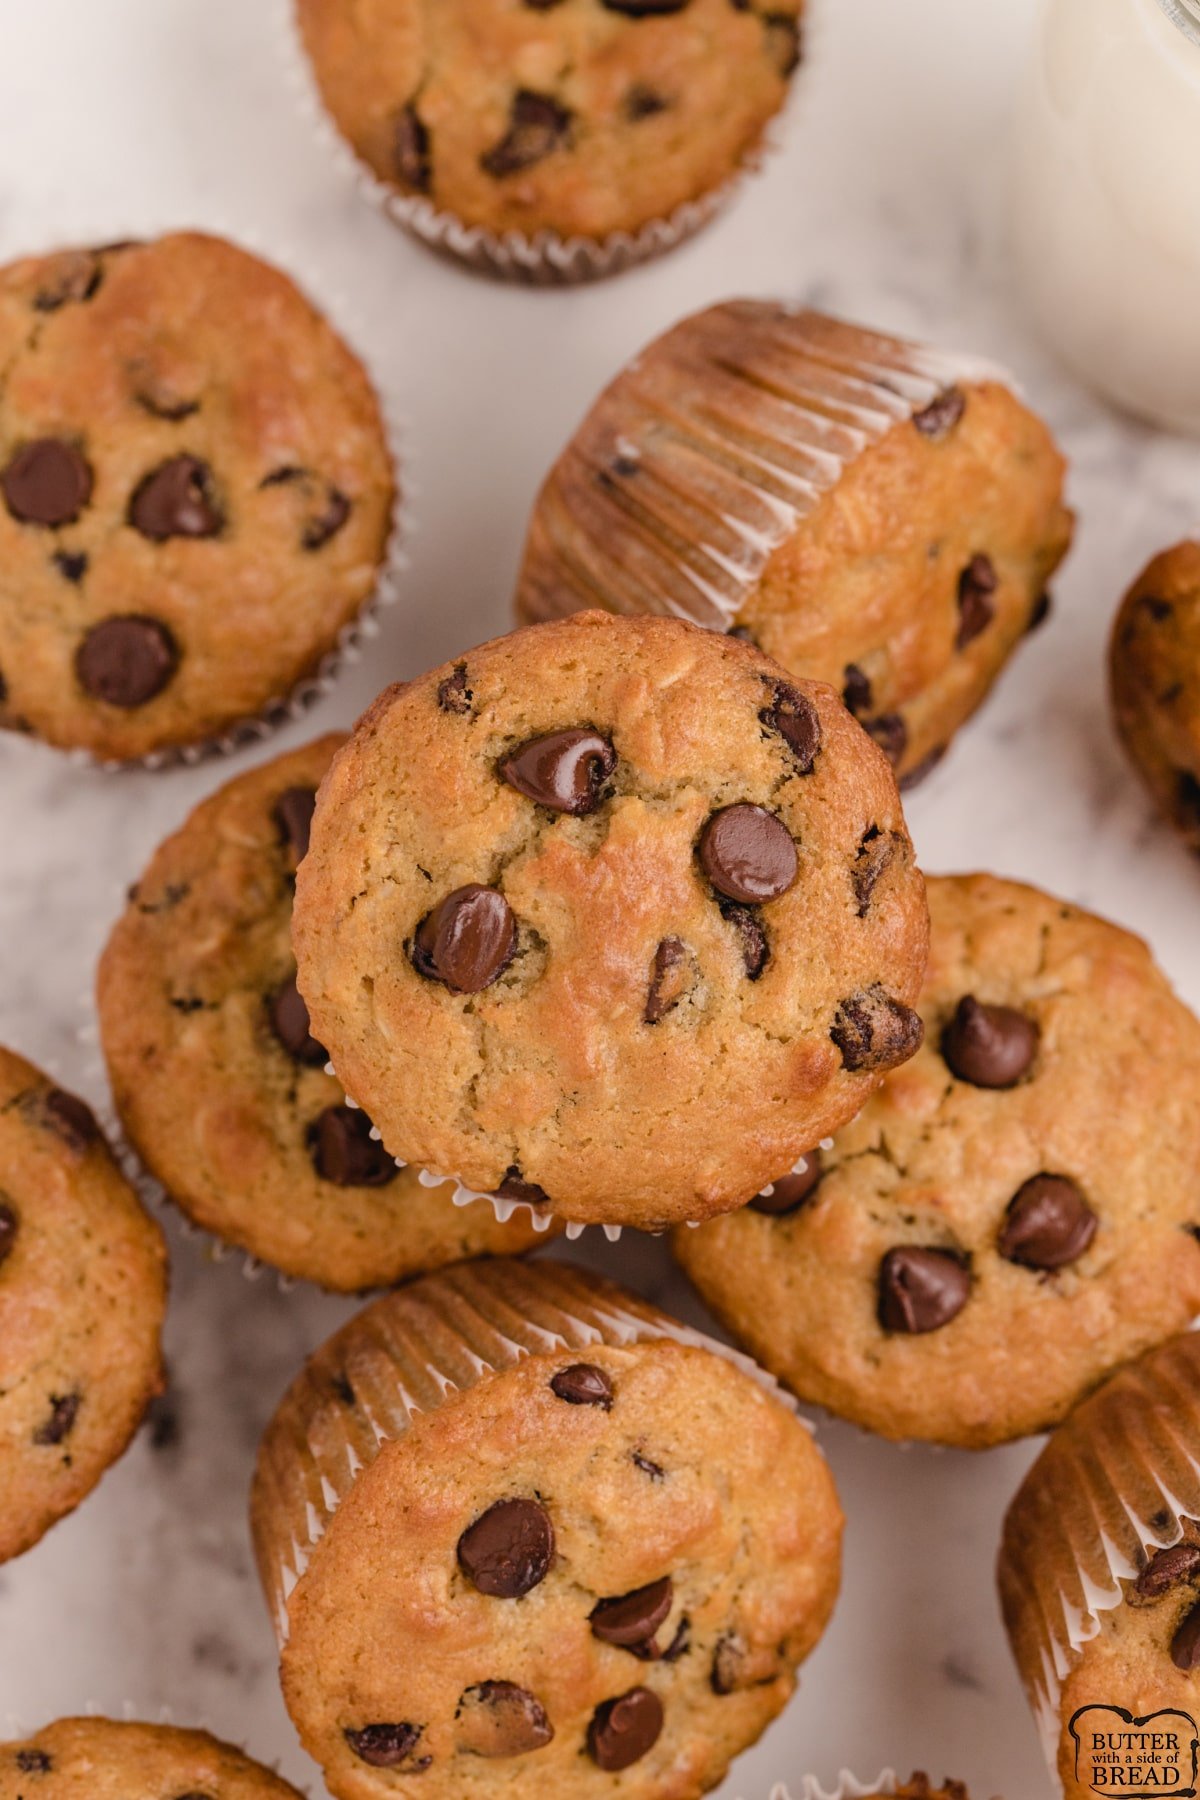 Oatmeal muffins with chocolate chips